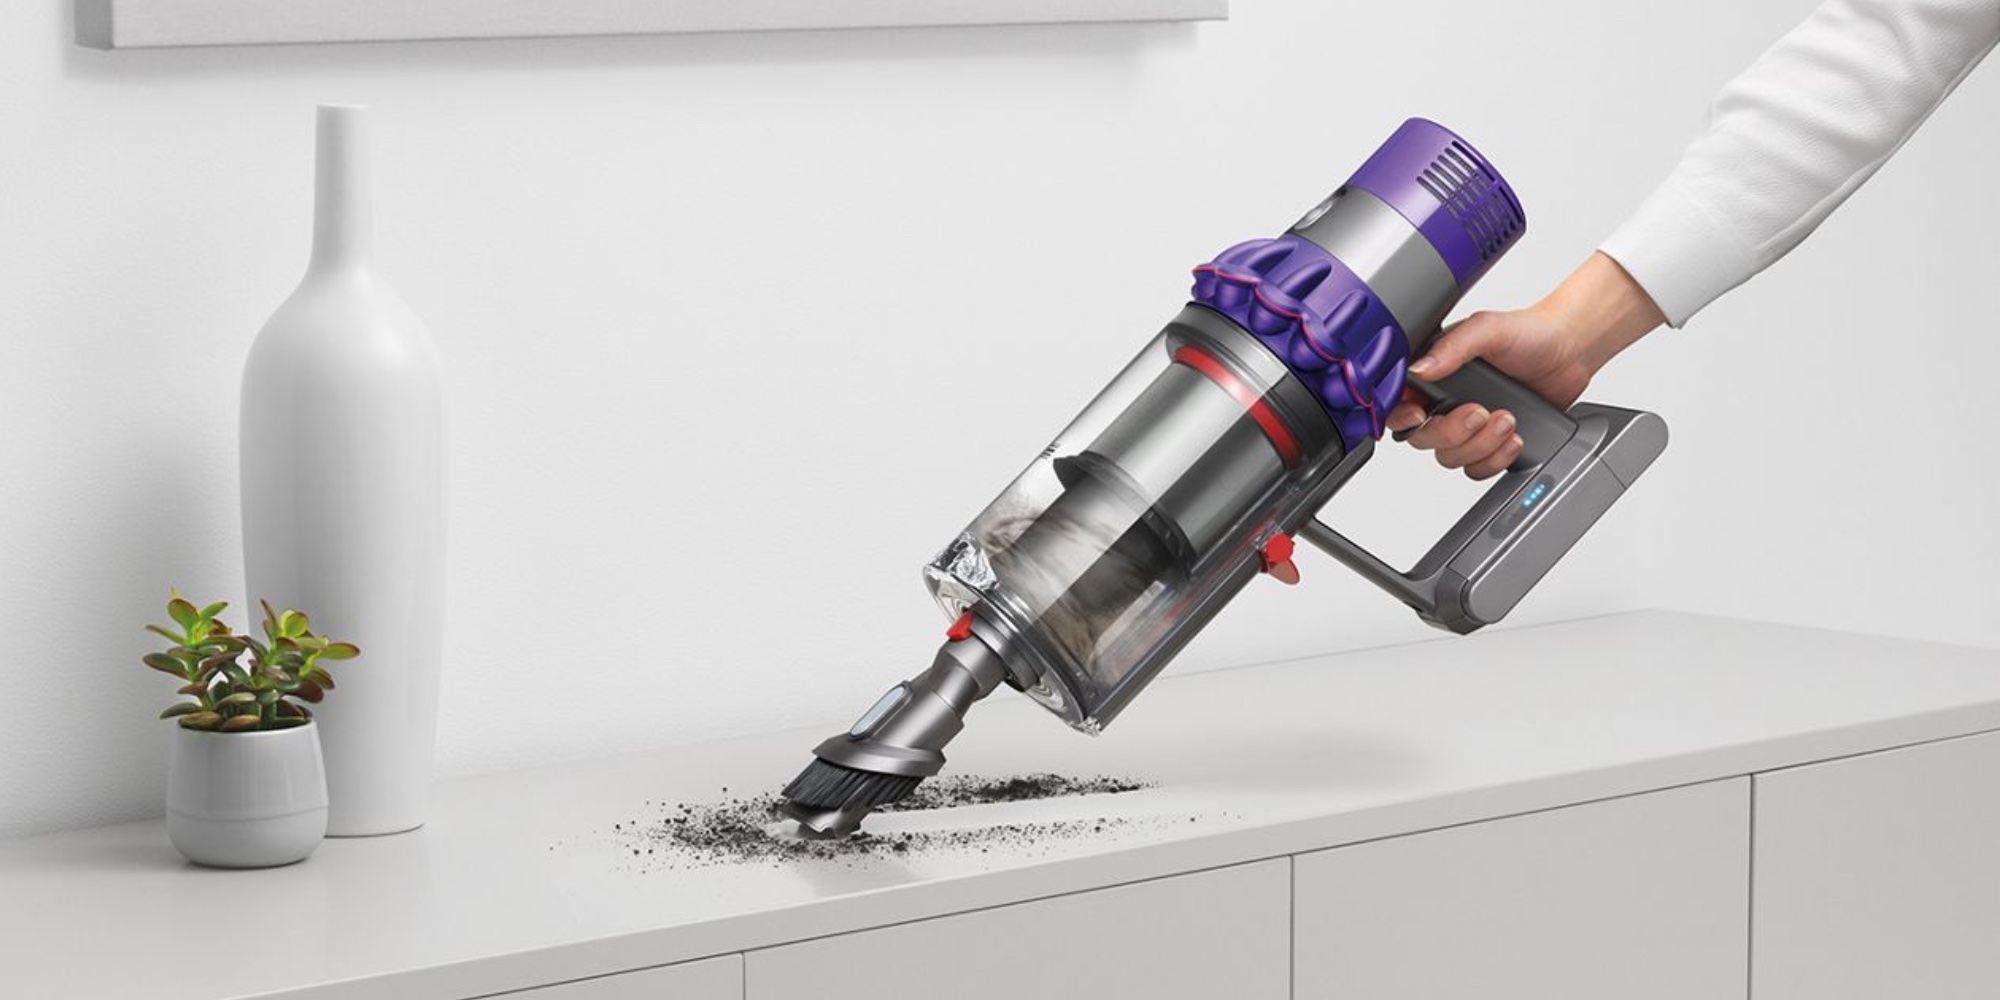 Dyson's Cyclone V10 Animal Cordless Stick Vacuum can be yours at $200 off